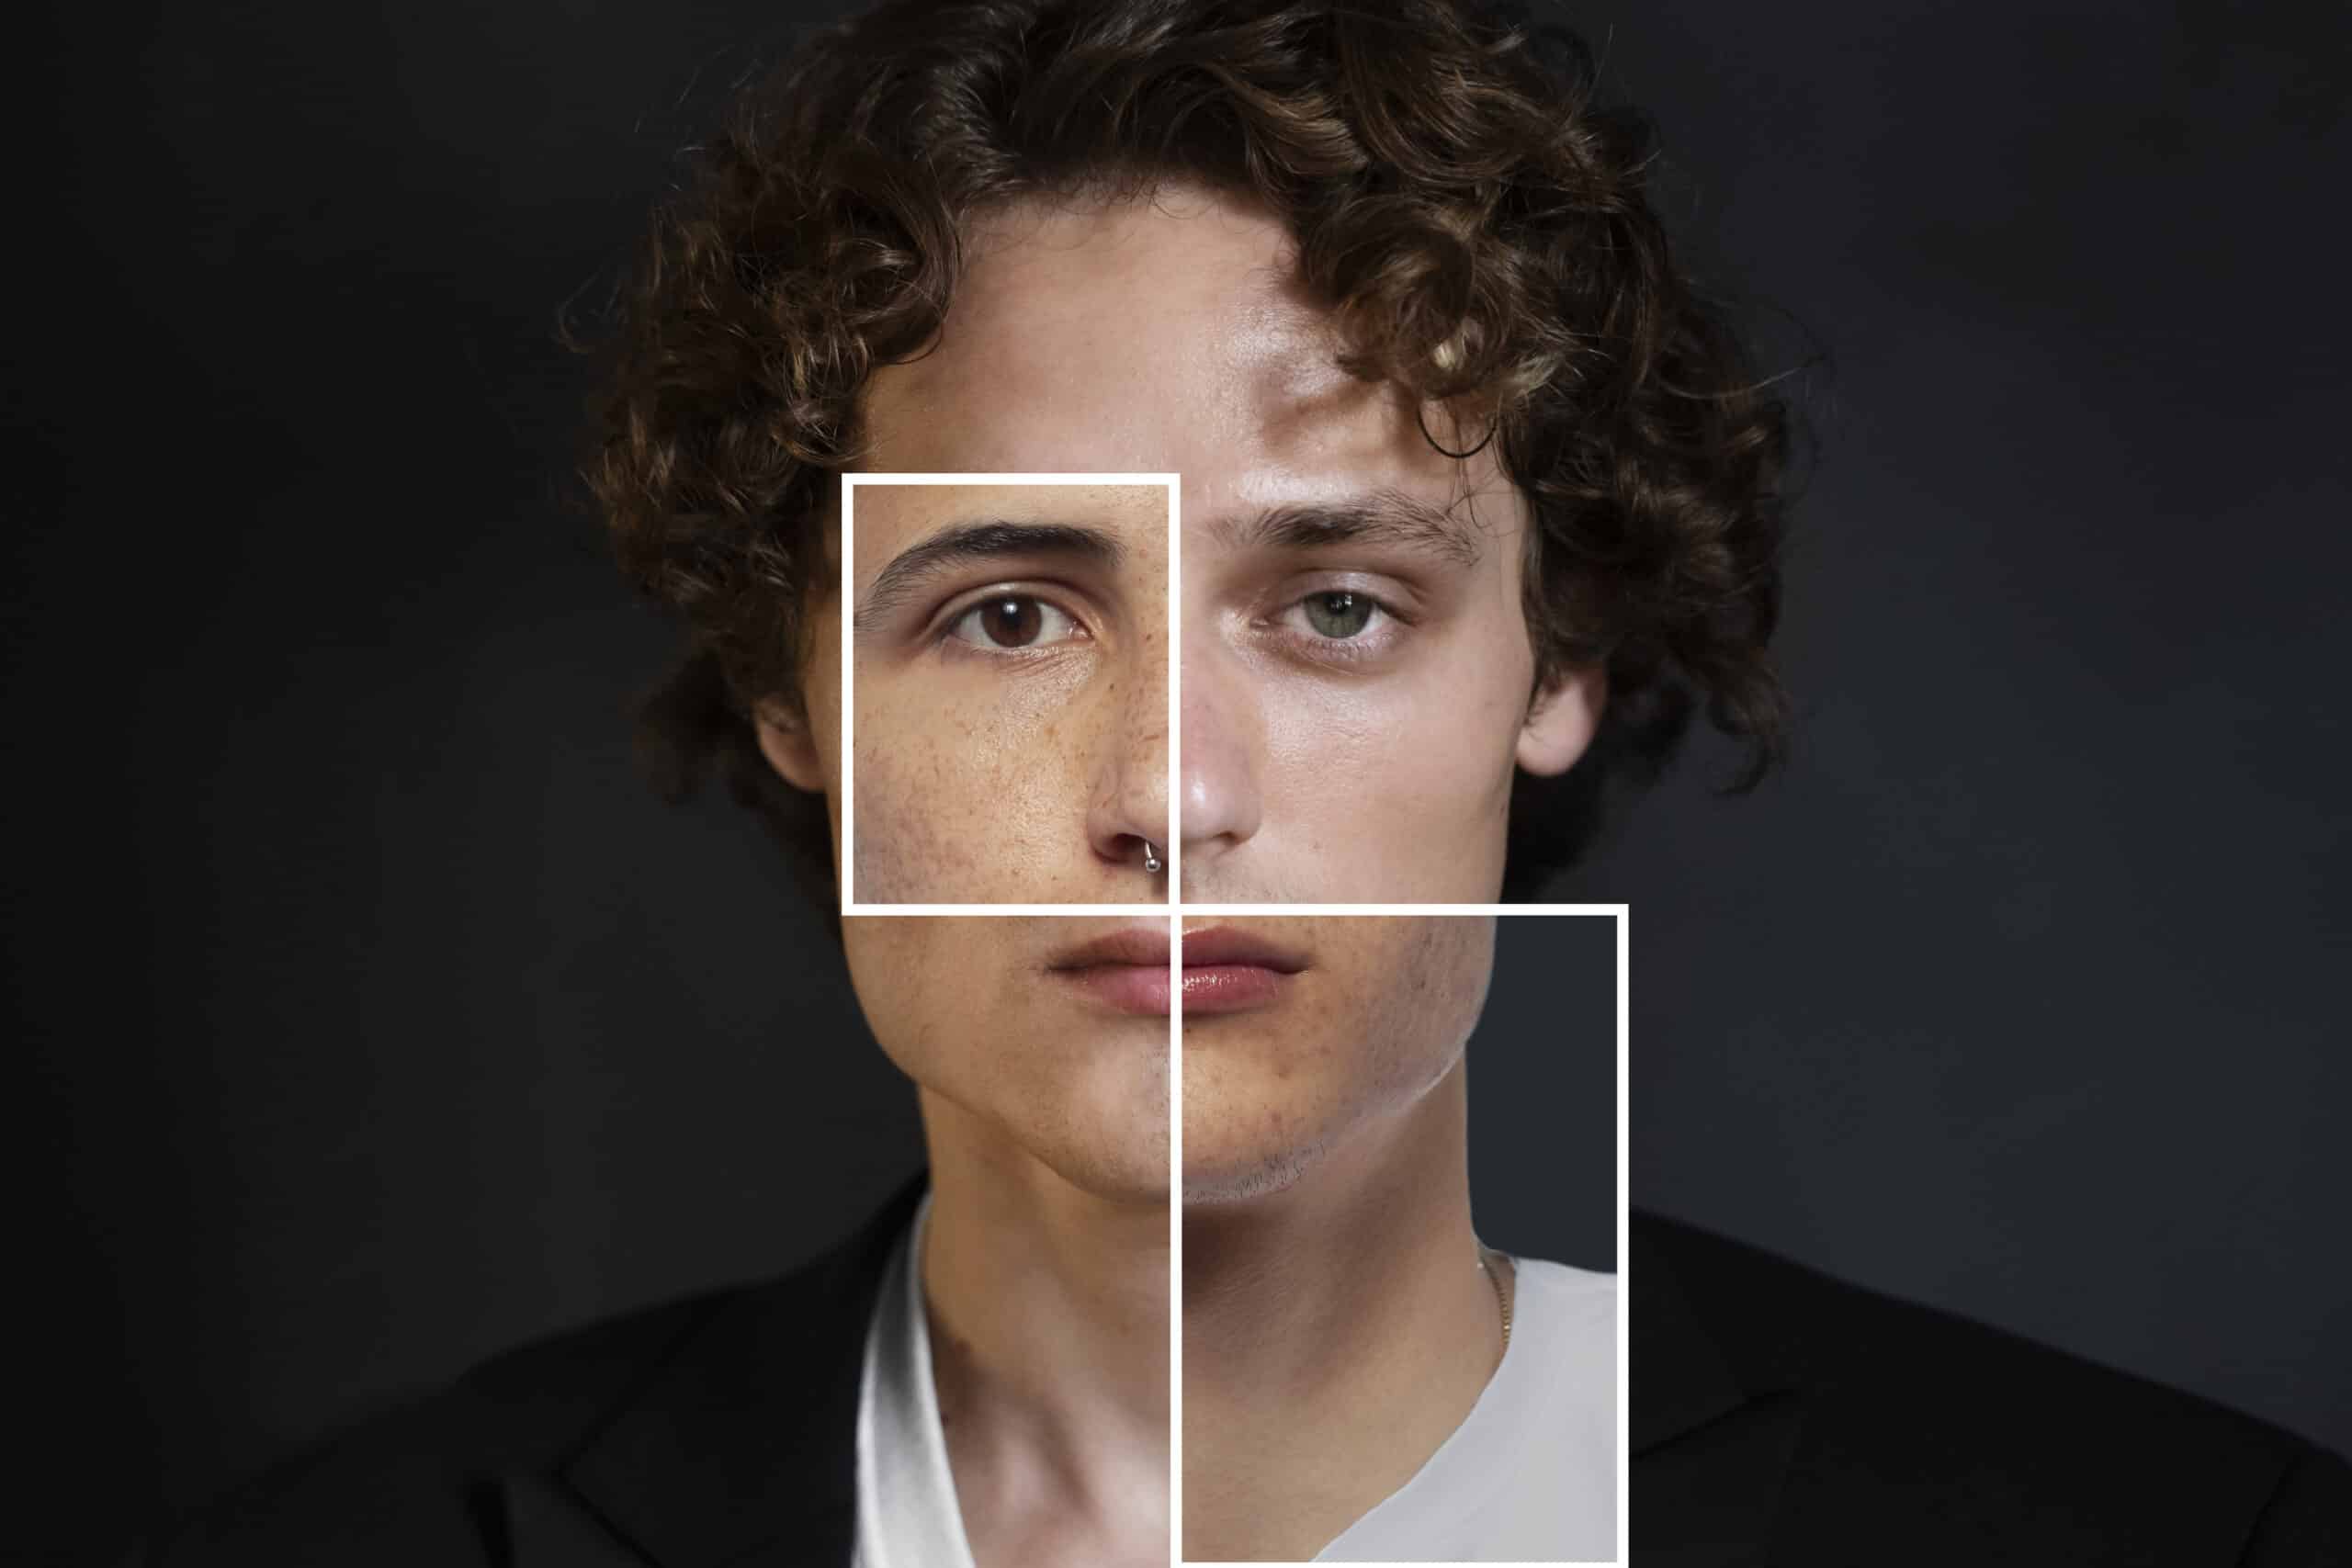 Facial Recognition for Identity Verification: The Future of Security